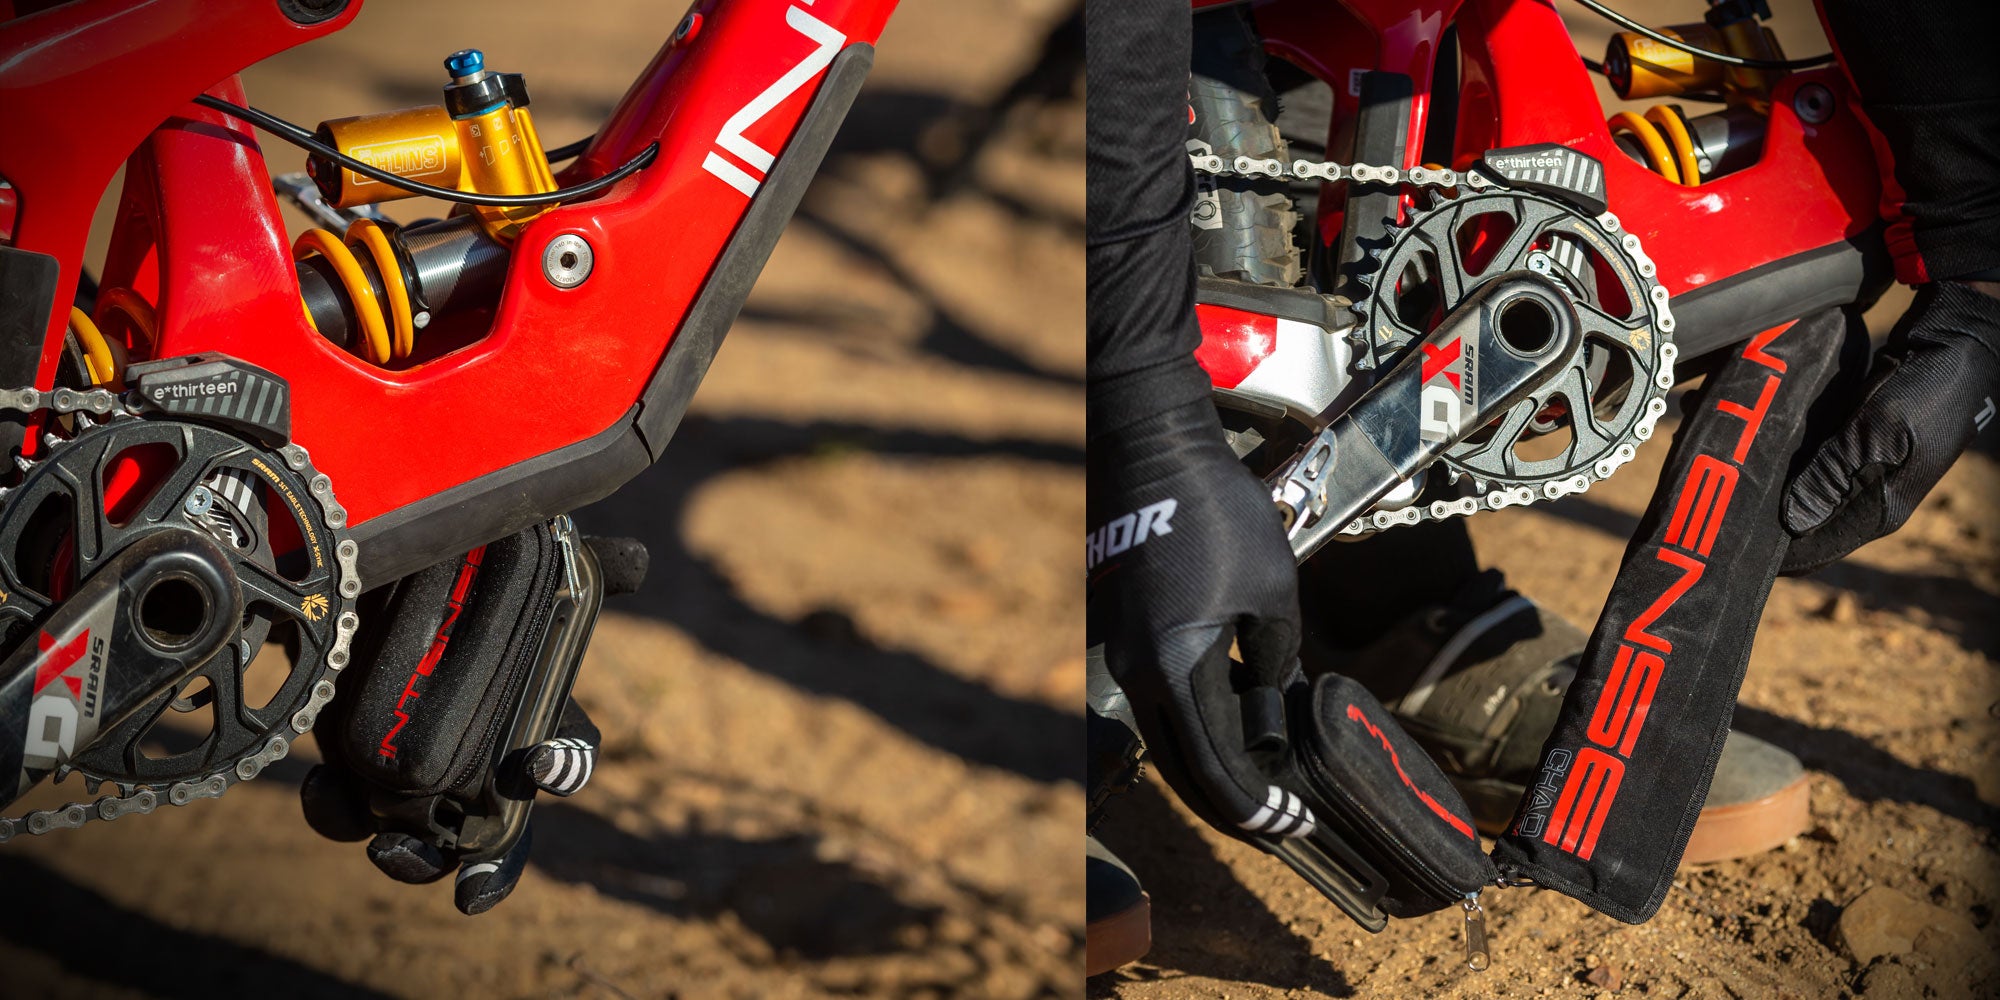 Dylan Wood and Eric Freson review the Intense Tracer 279 for Blister